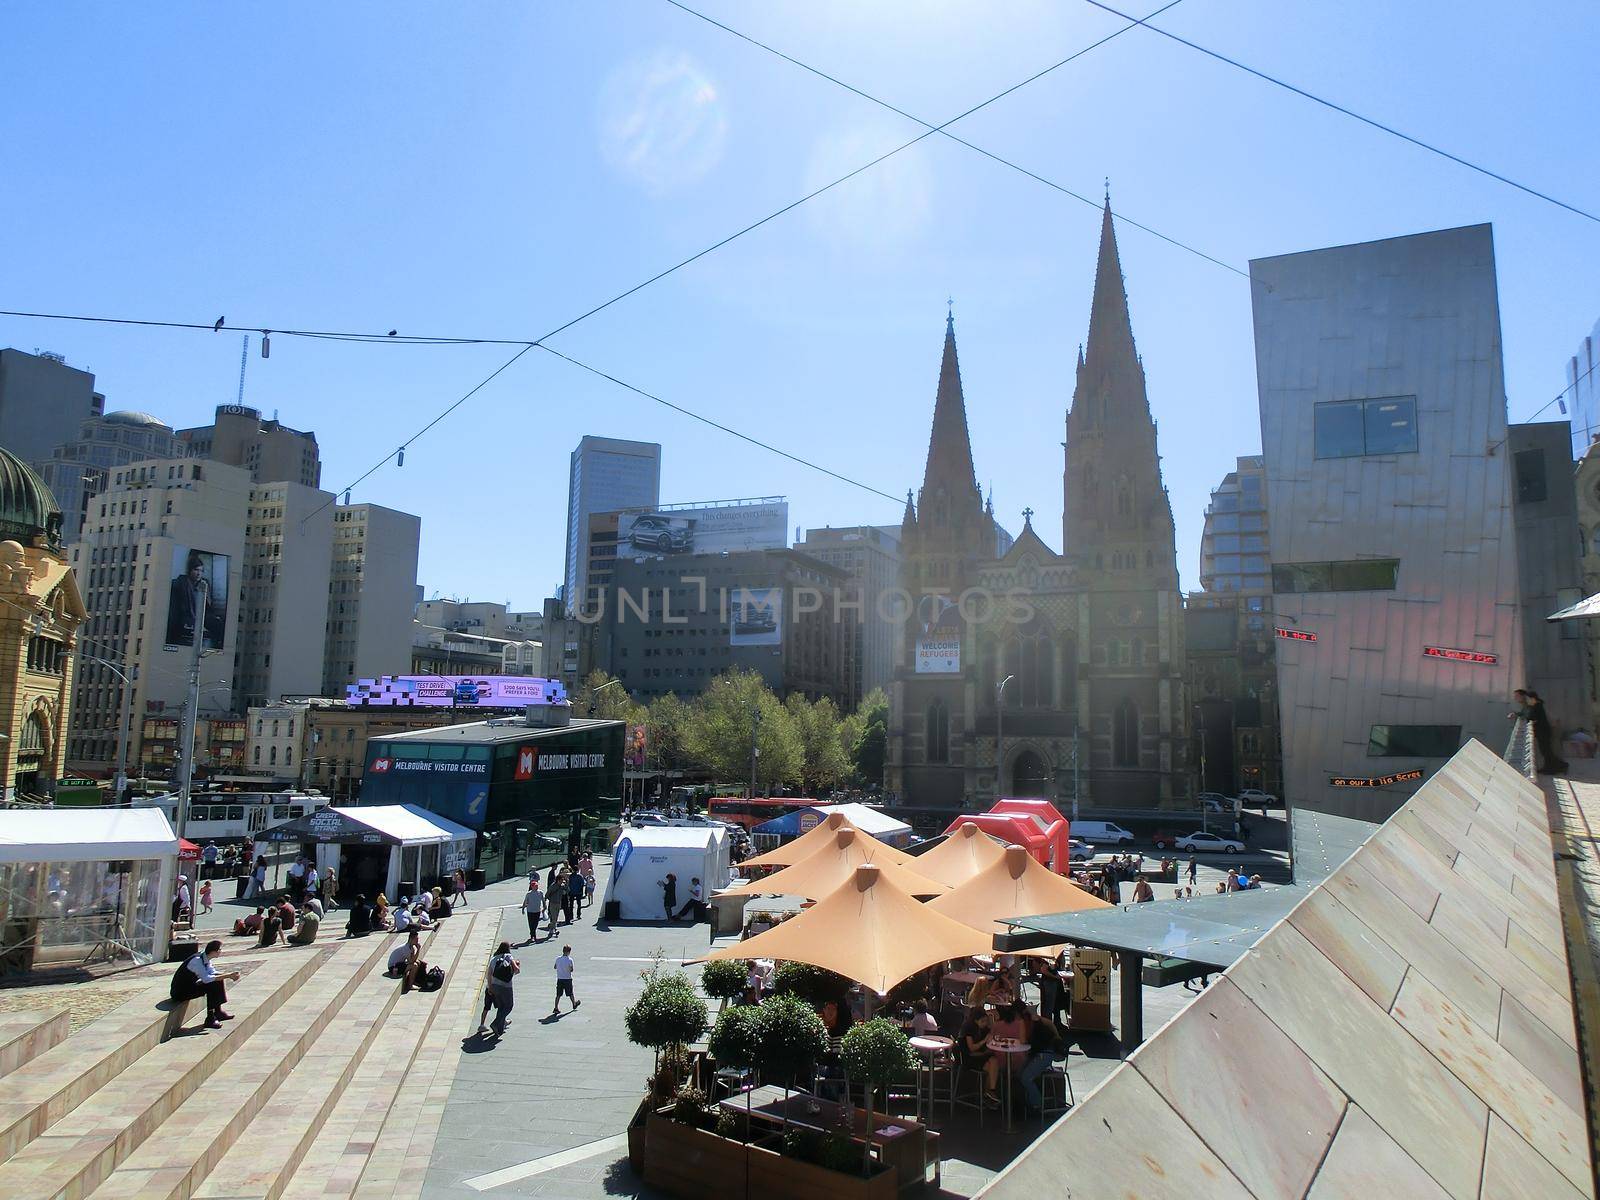 Federation Square and St. Paul's Cathedral in downtown Melbourne by bettercallcurry